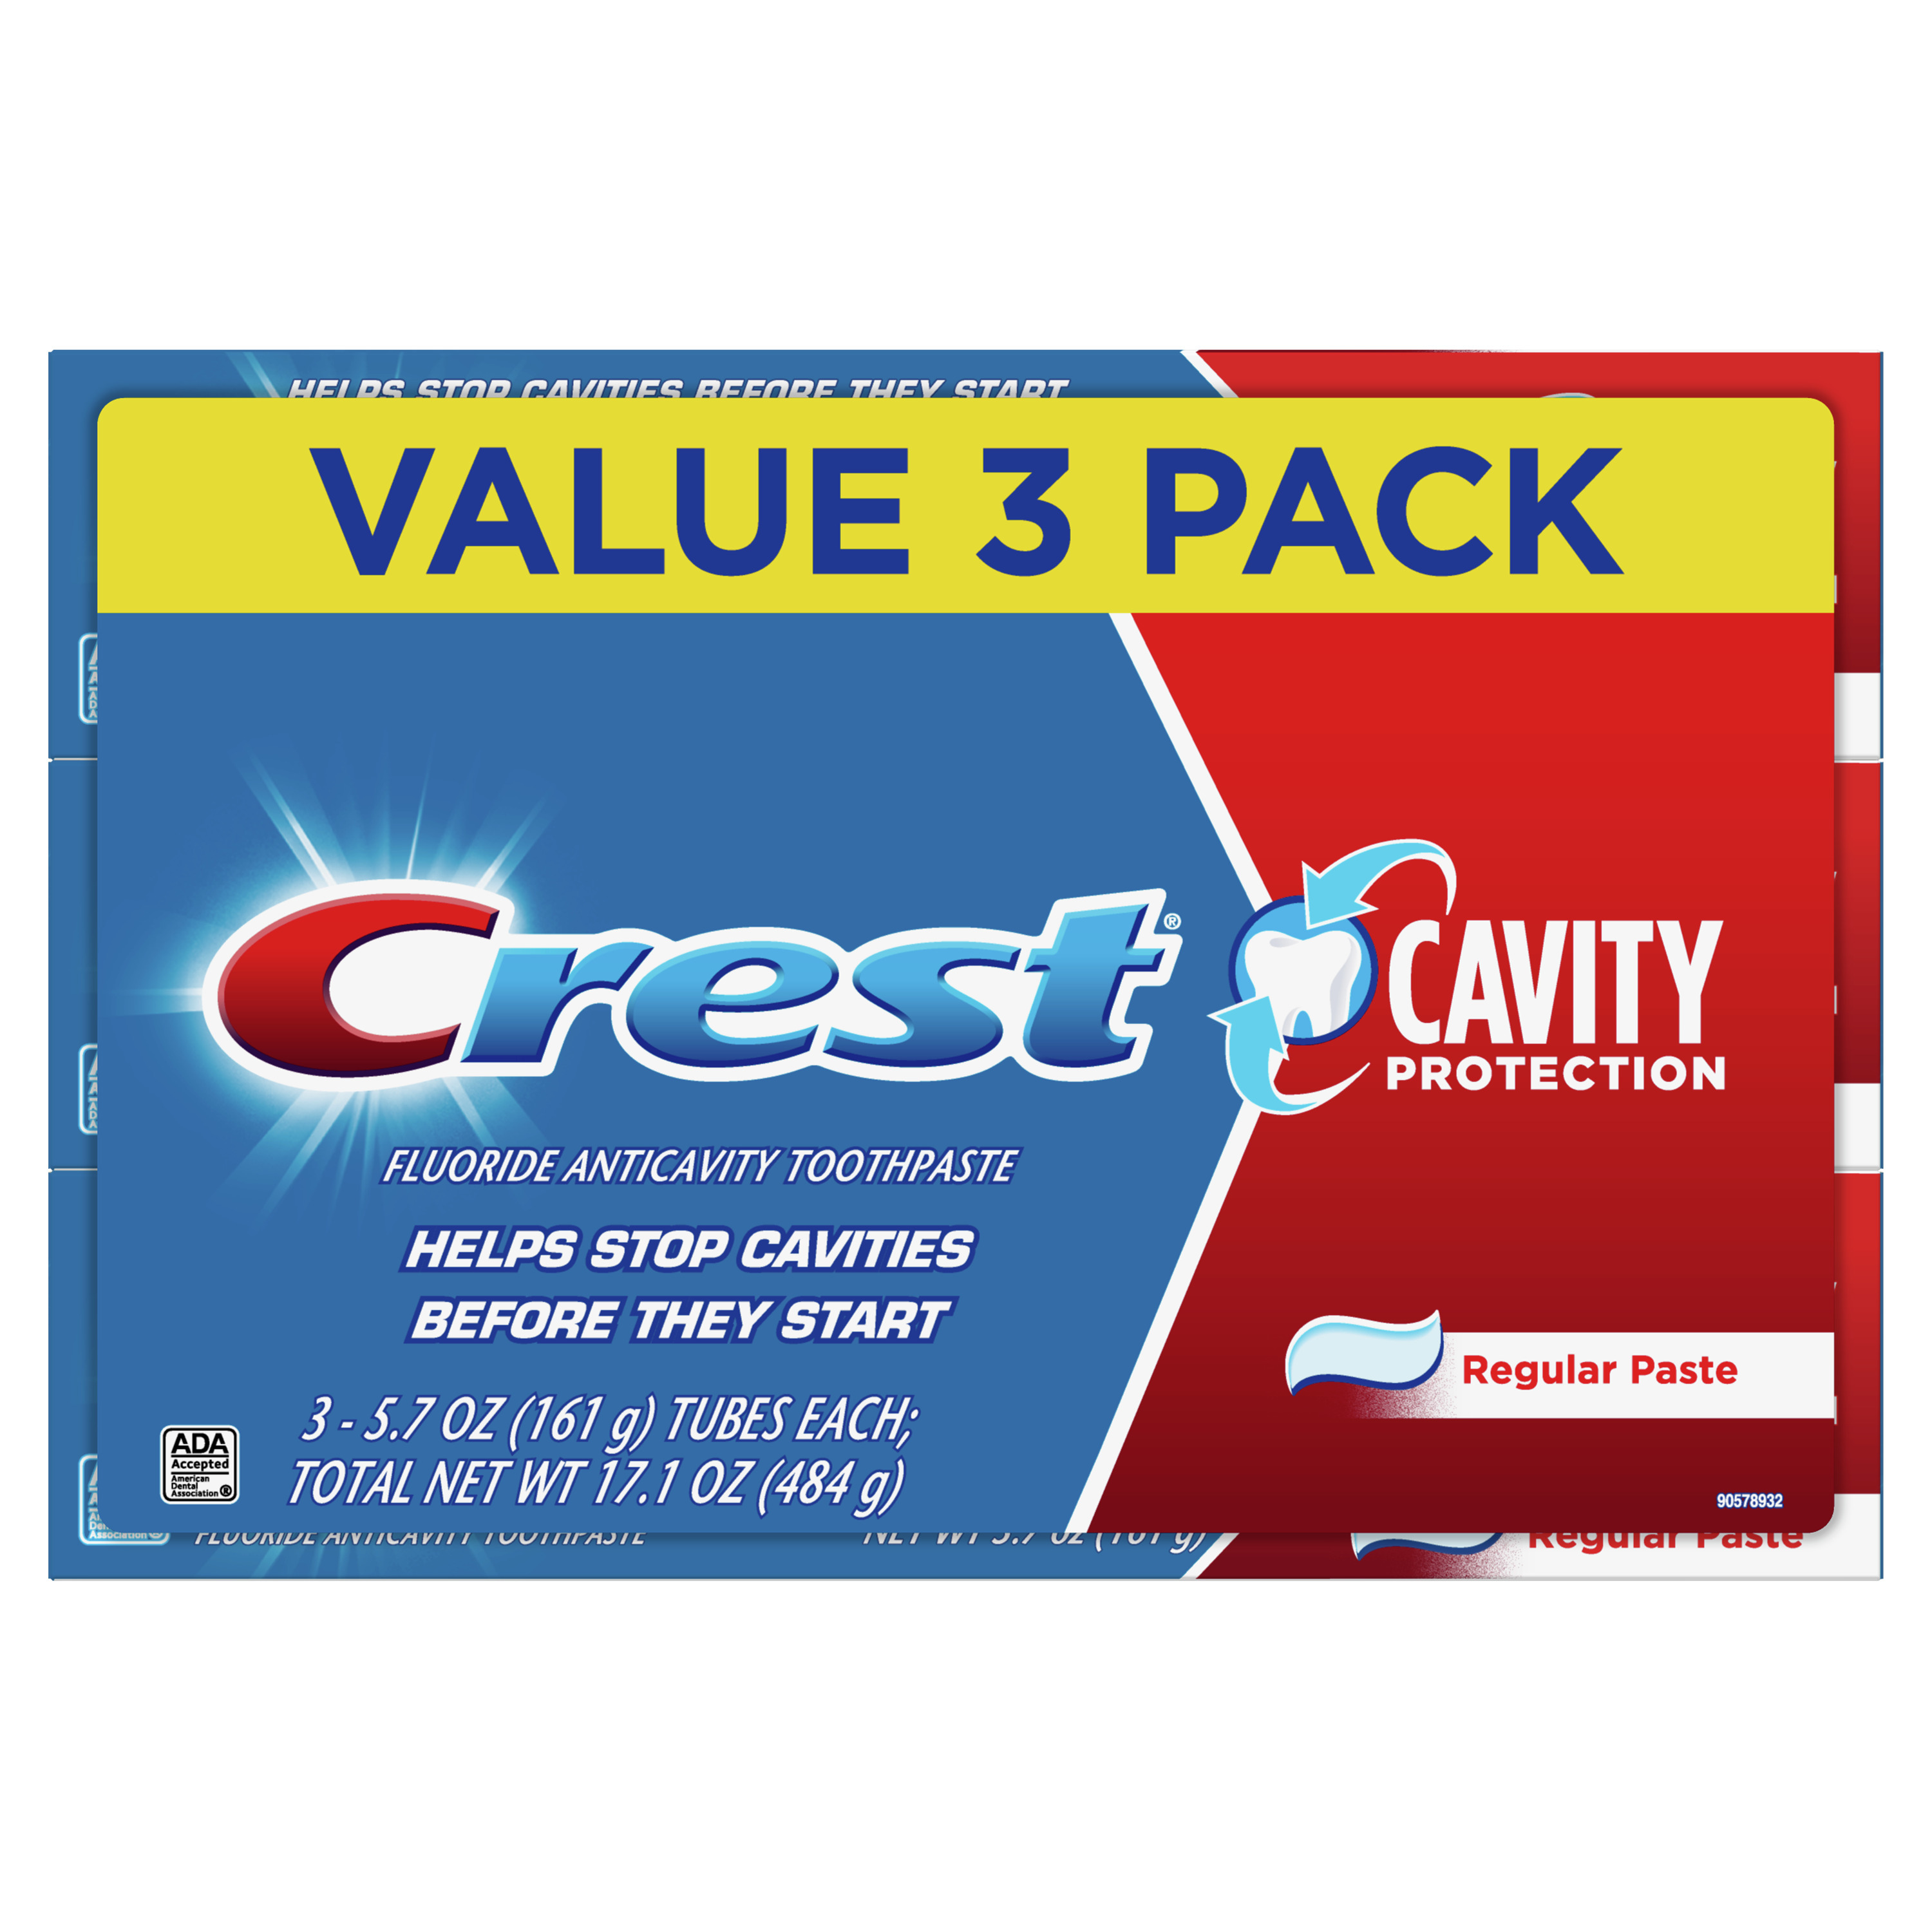 Crest Cavity Protection Toothpaste, Regular Paste, 5.7 oz, 3 Pack - image 1 of 7